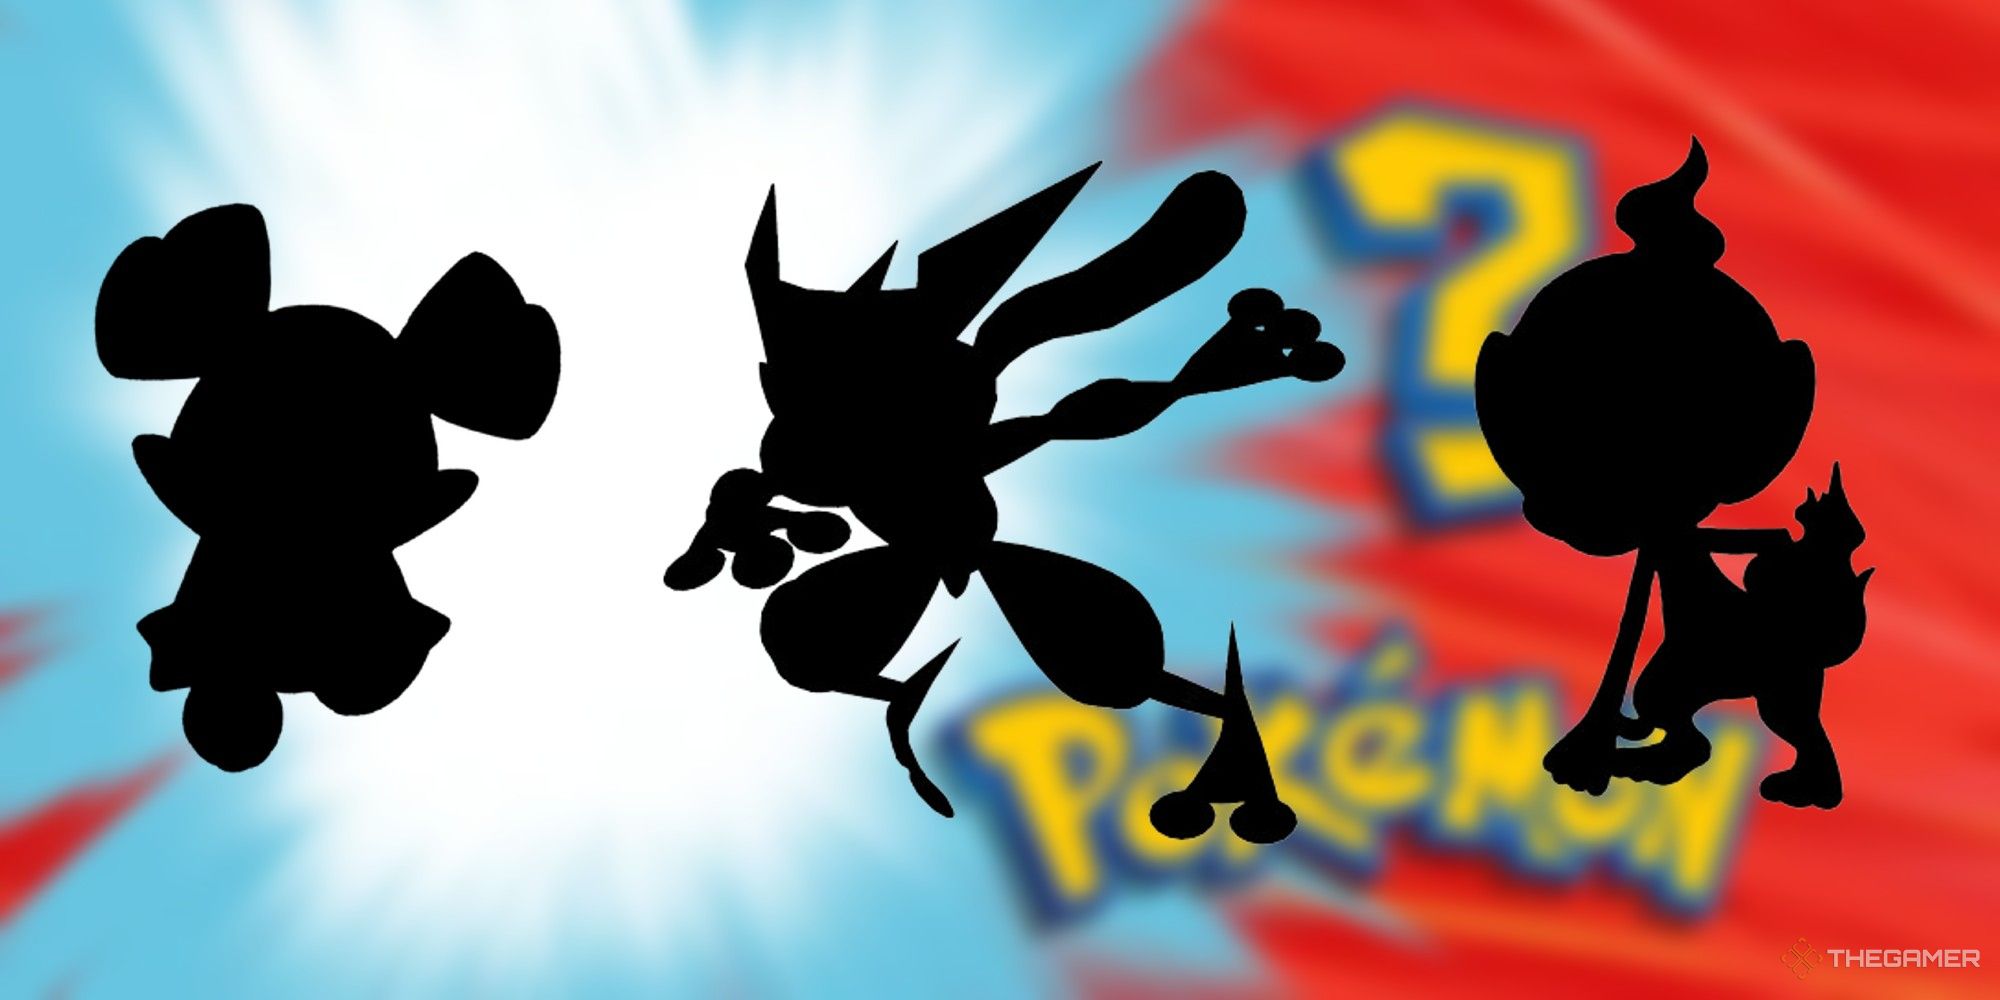 chimchar greninja and snubbull sillhouettes on a who's that pokemon background